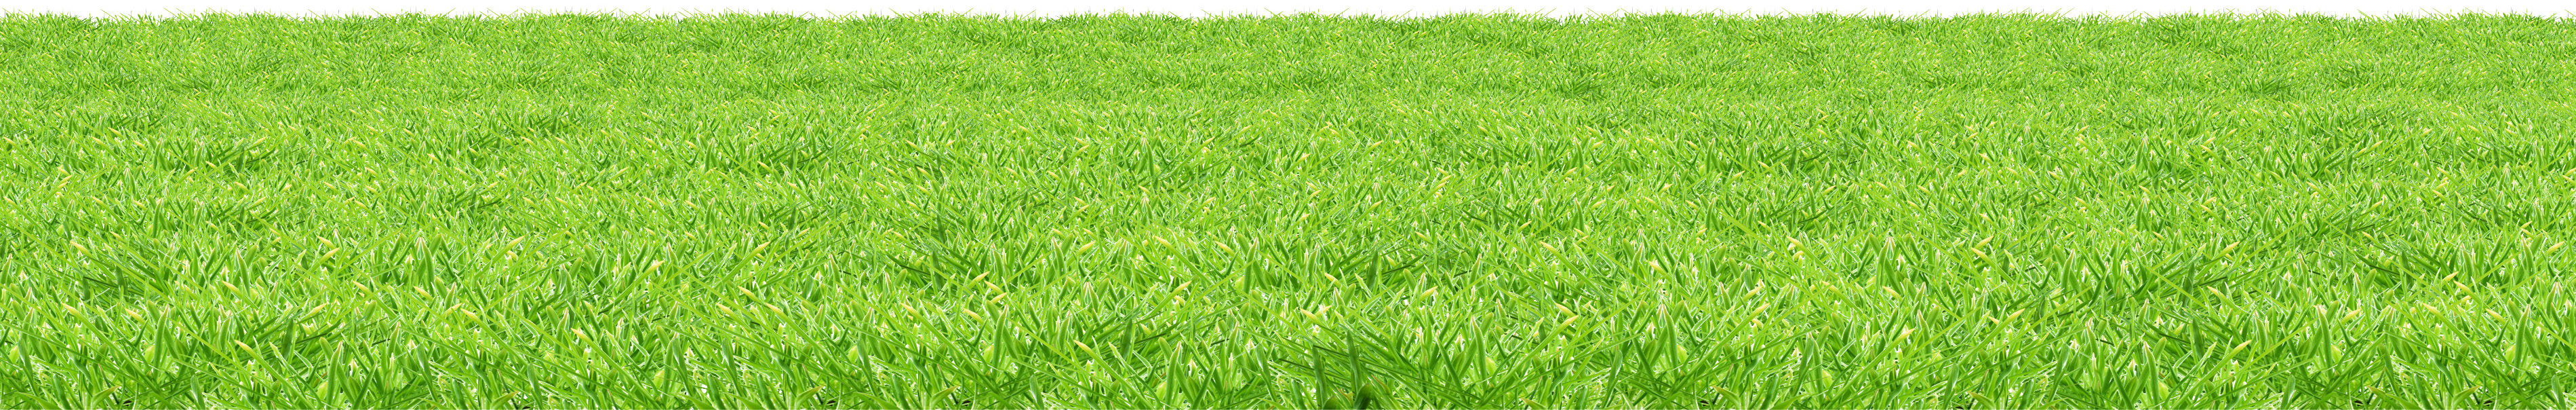 Meadow Greenscape Free Download Image PNG Image